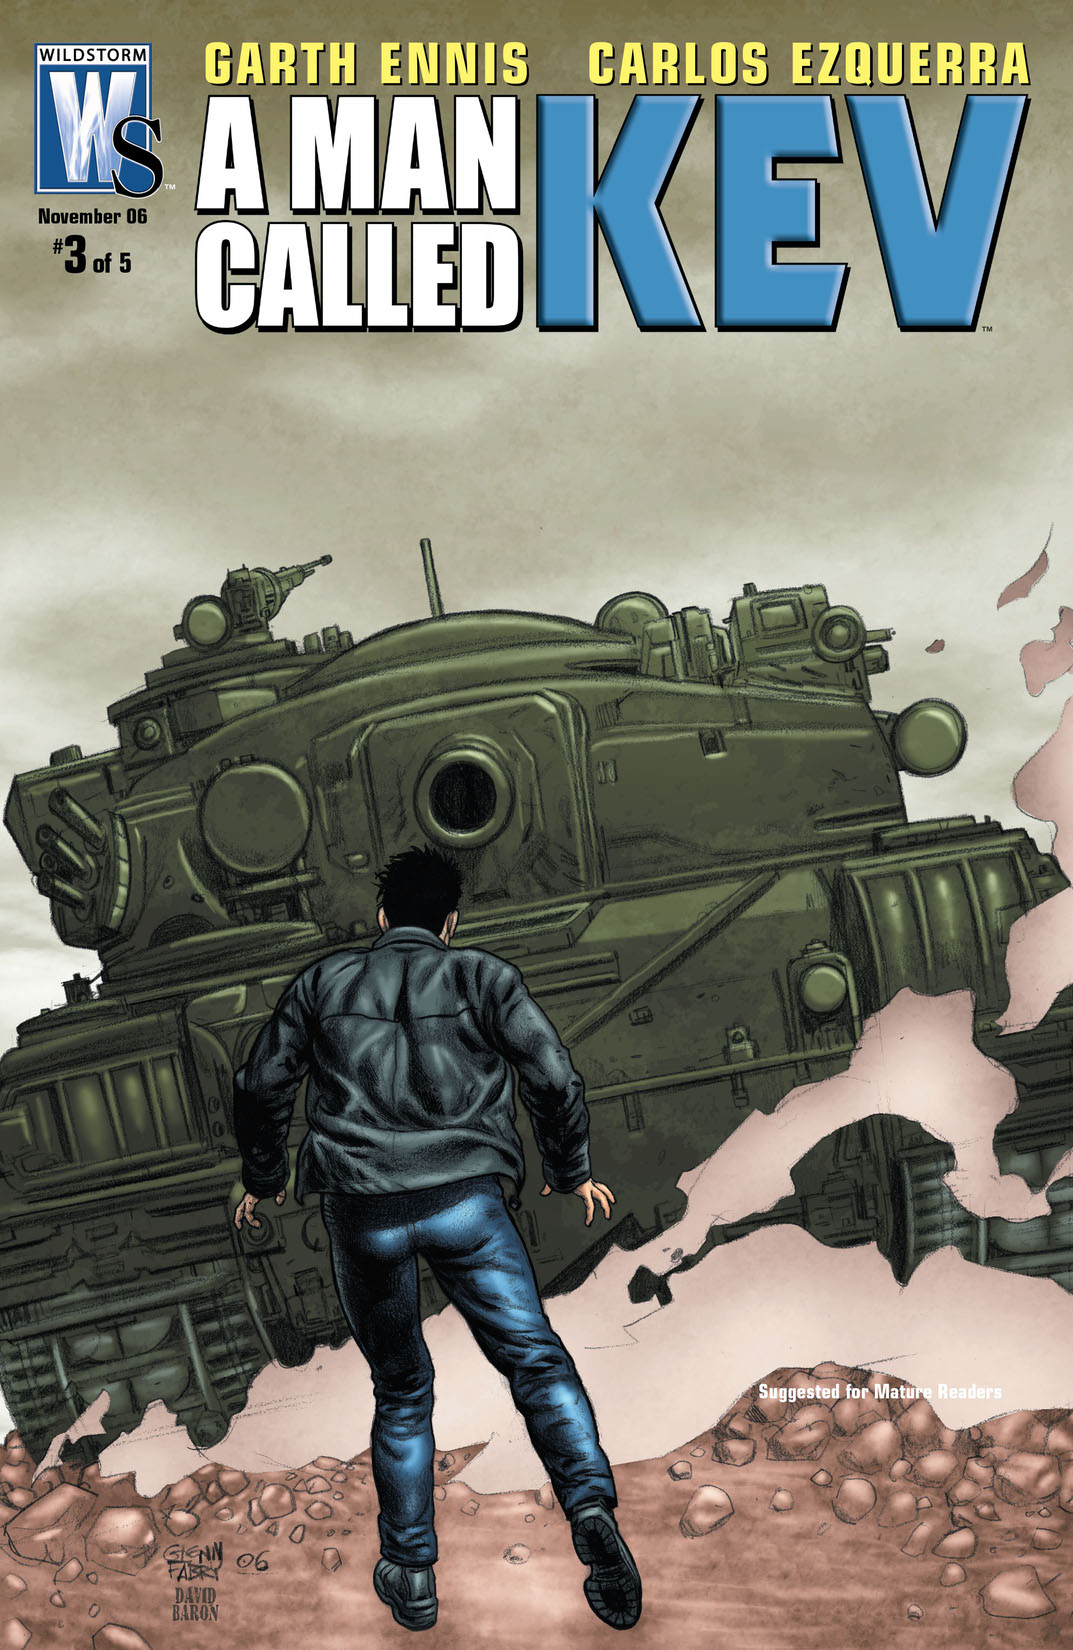 A Man Called Kev #3 preview images